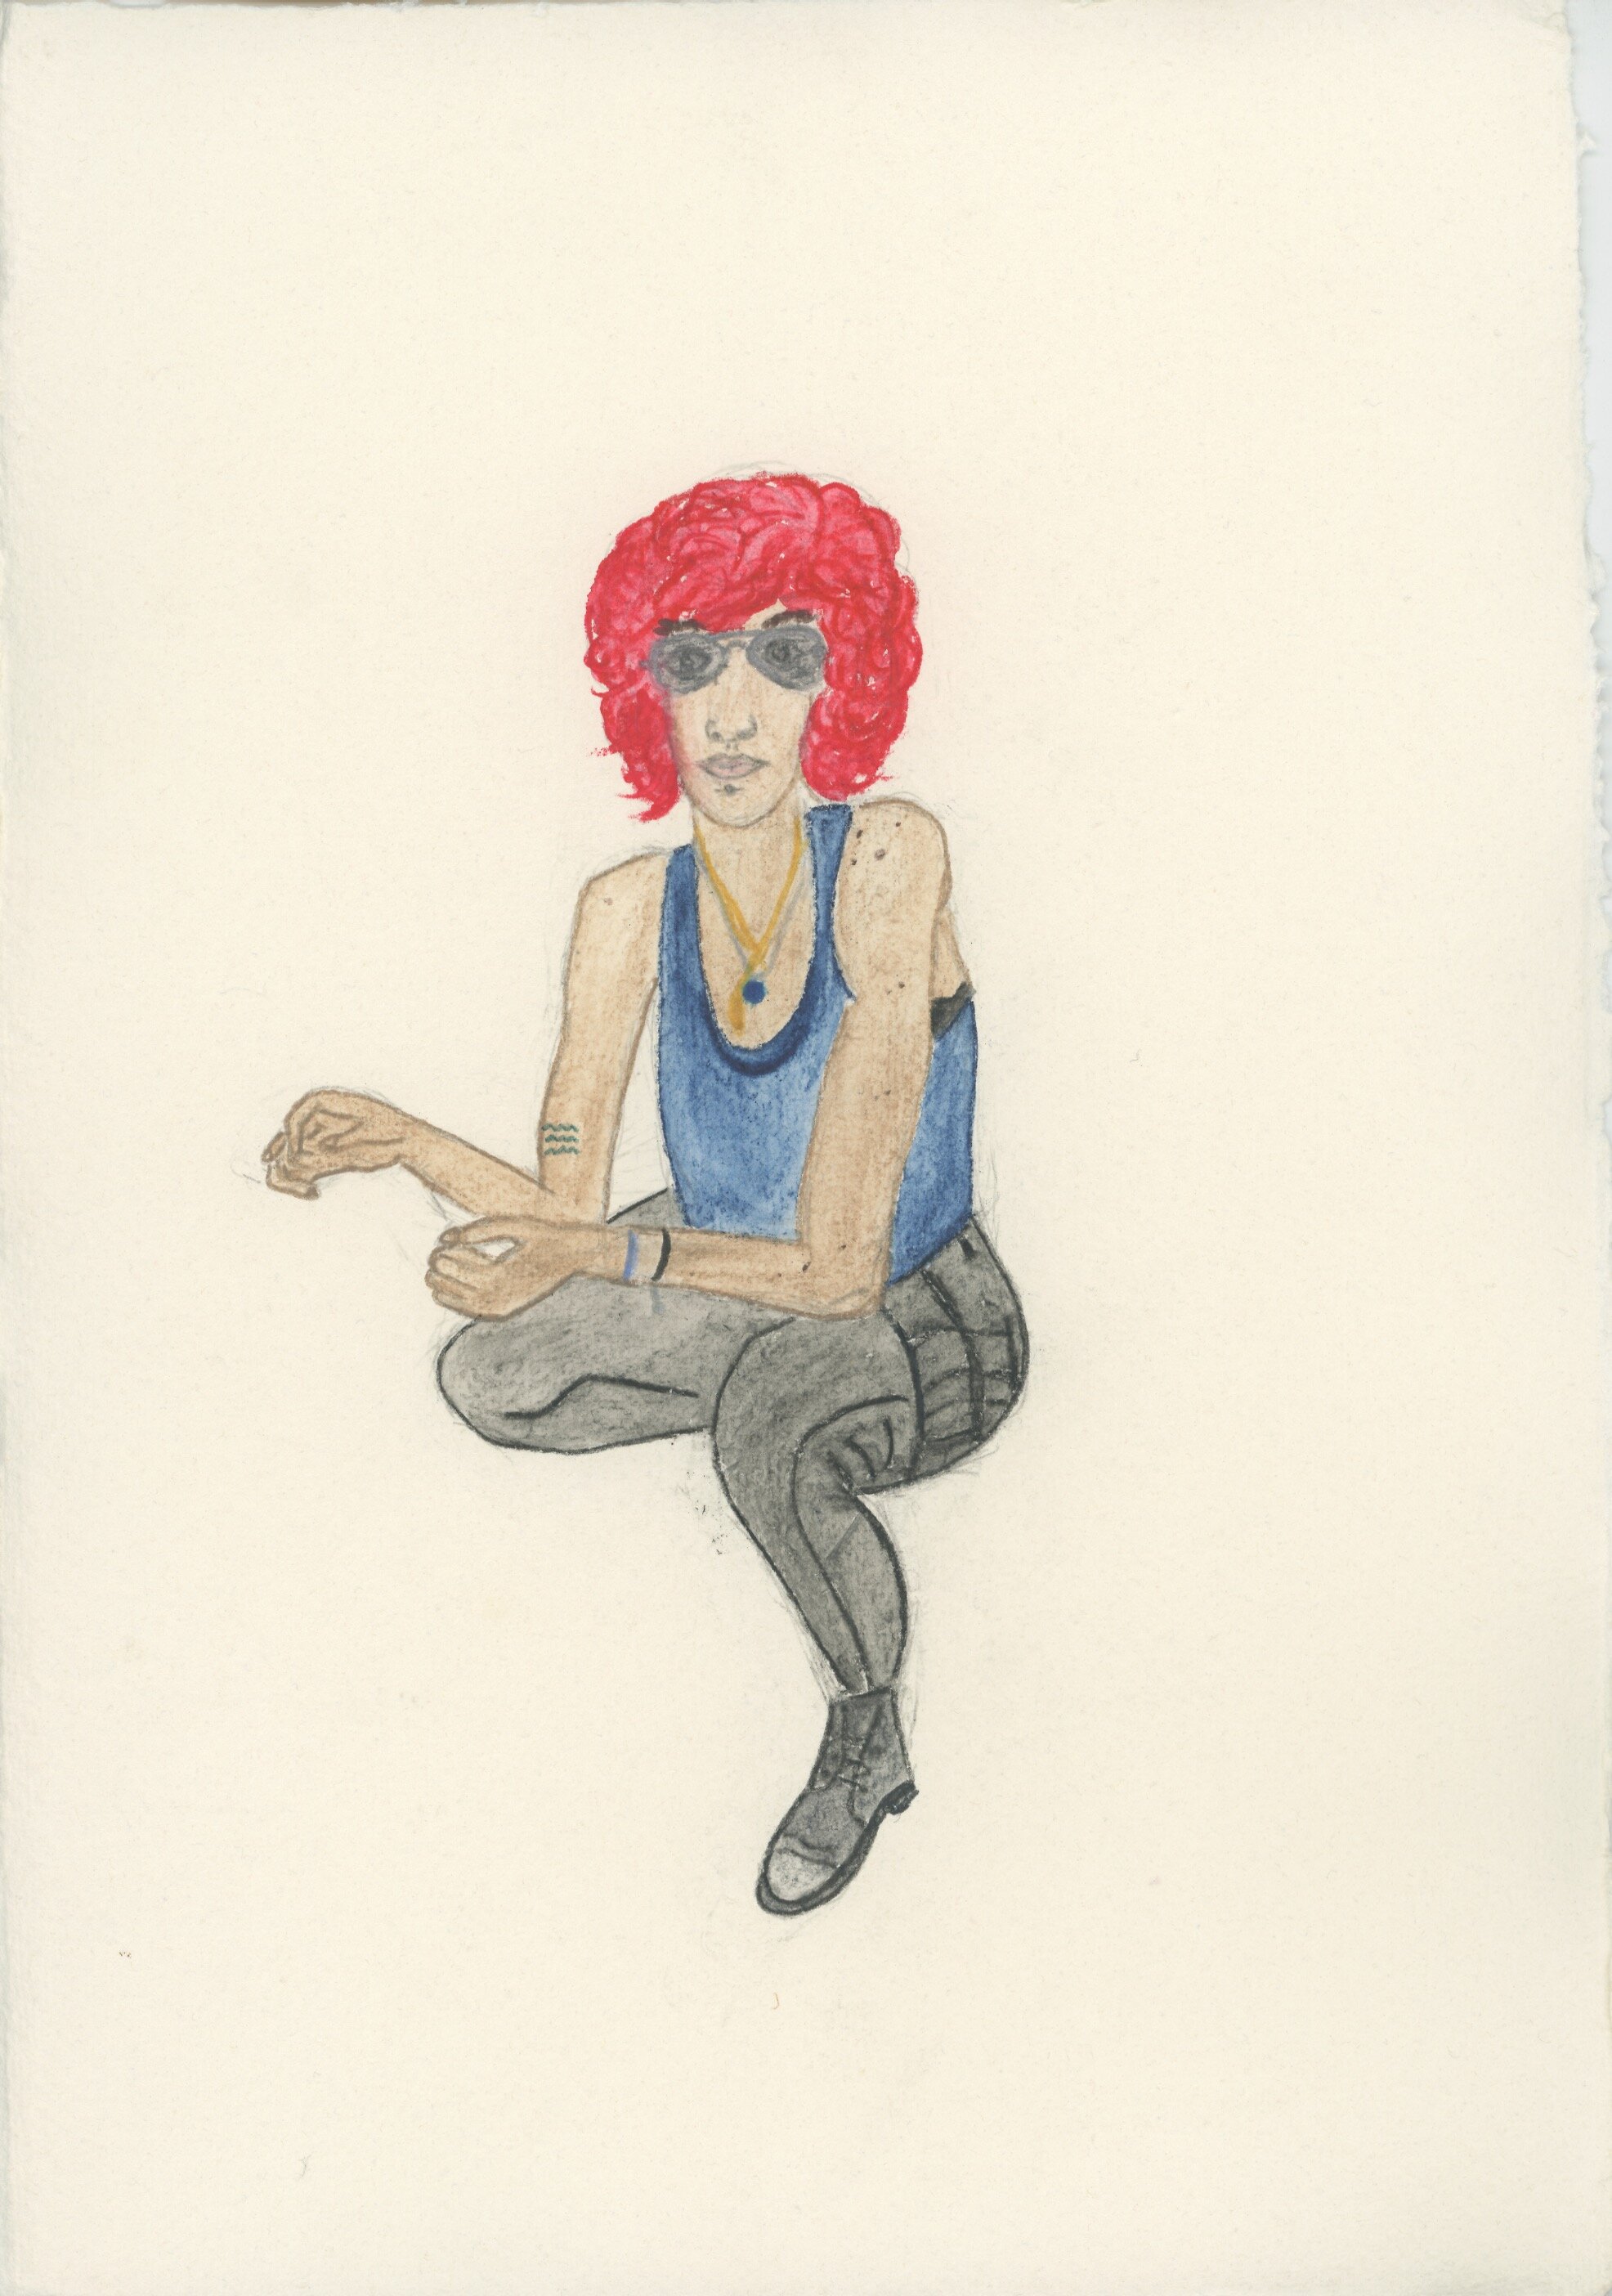 Pink haired woman posing, 25.5 x 30 cm, 2019